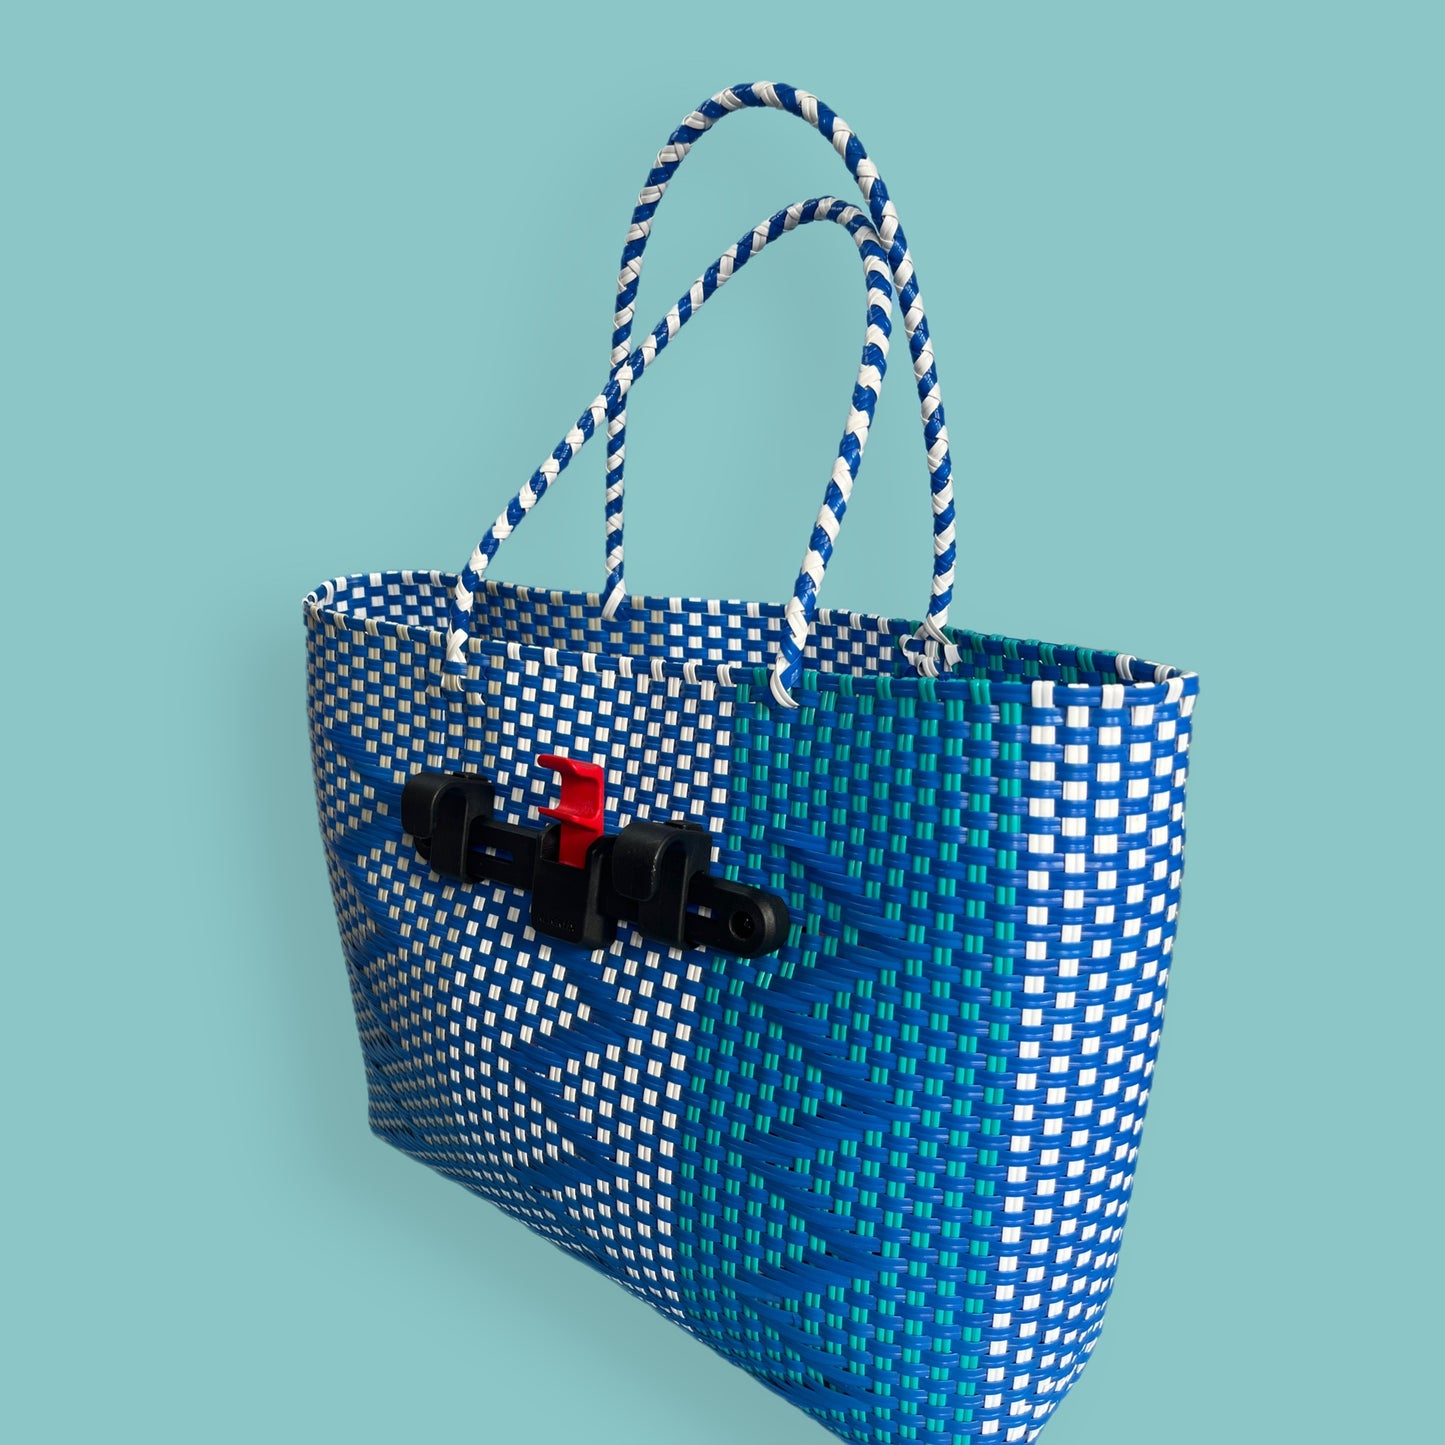 Bicycle Pannier recycled blue multicoloured plastic woven basket tote bag